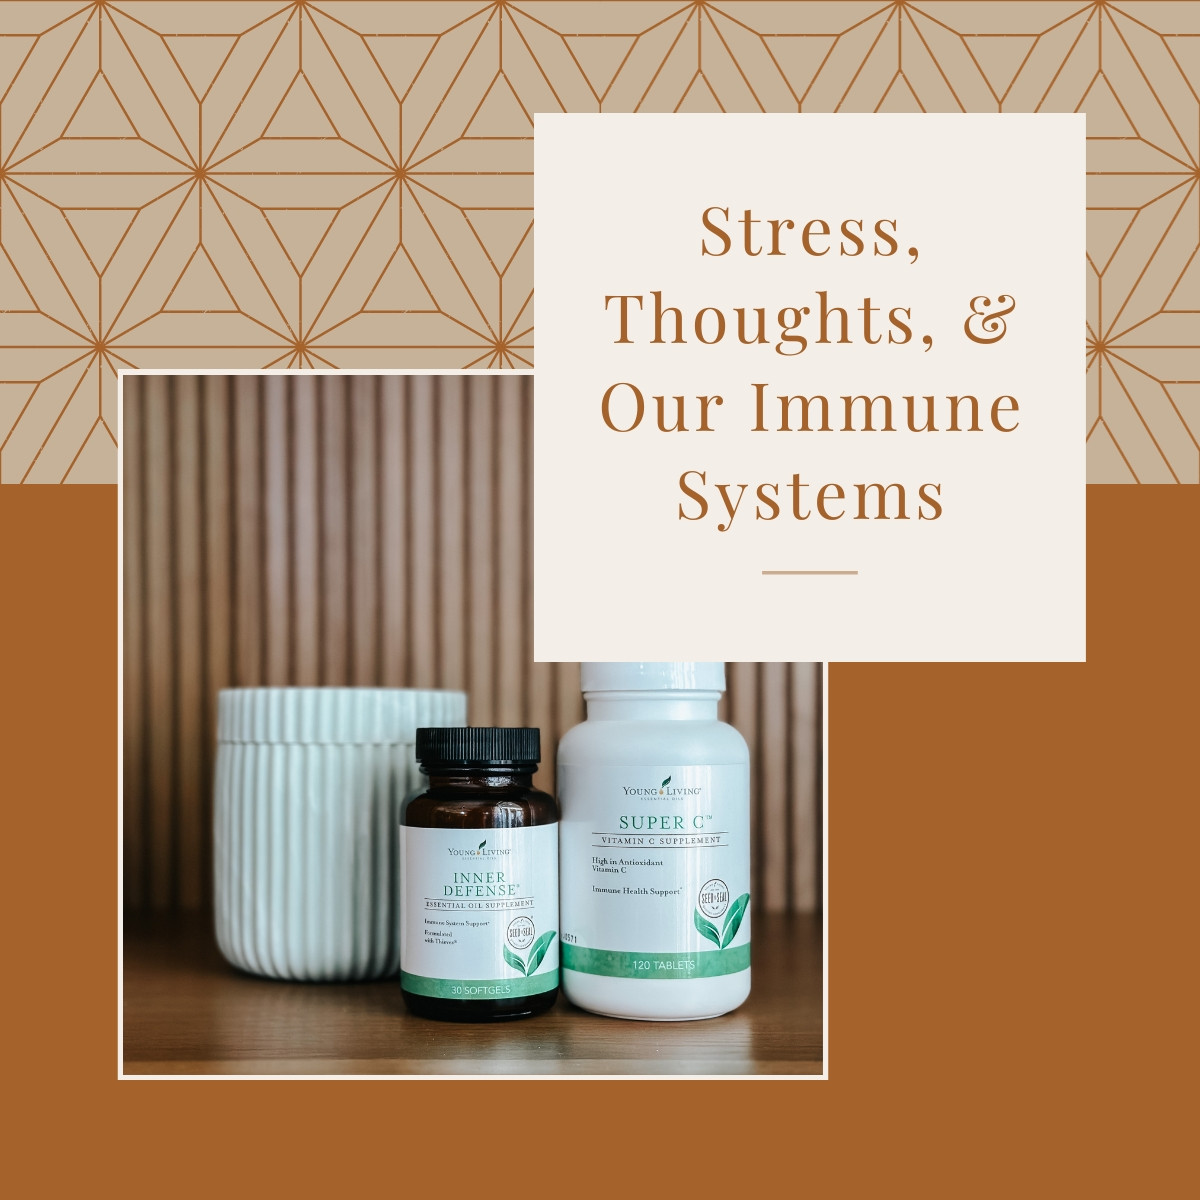 Stress, Thoughts, & Our Immune Systems